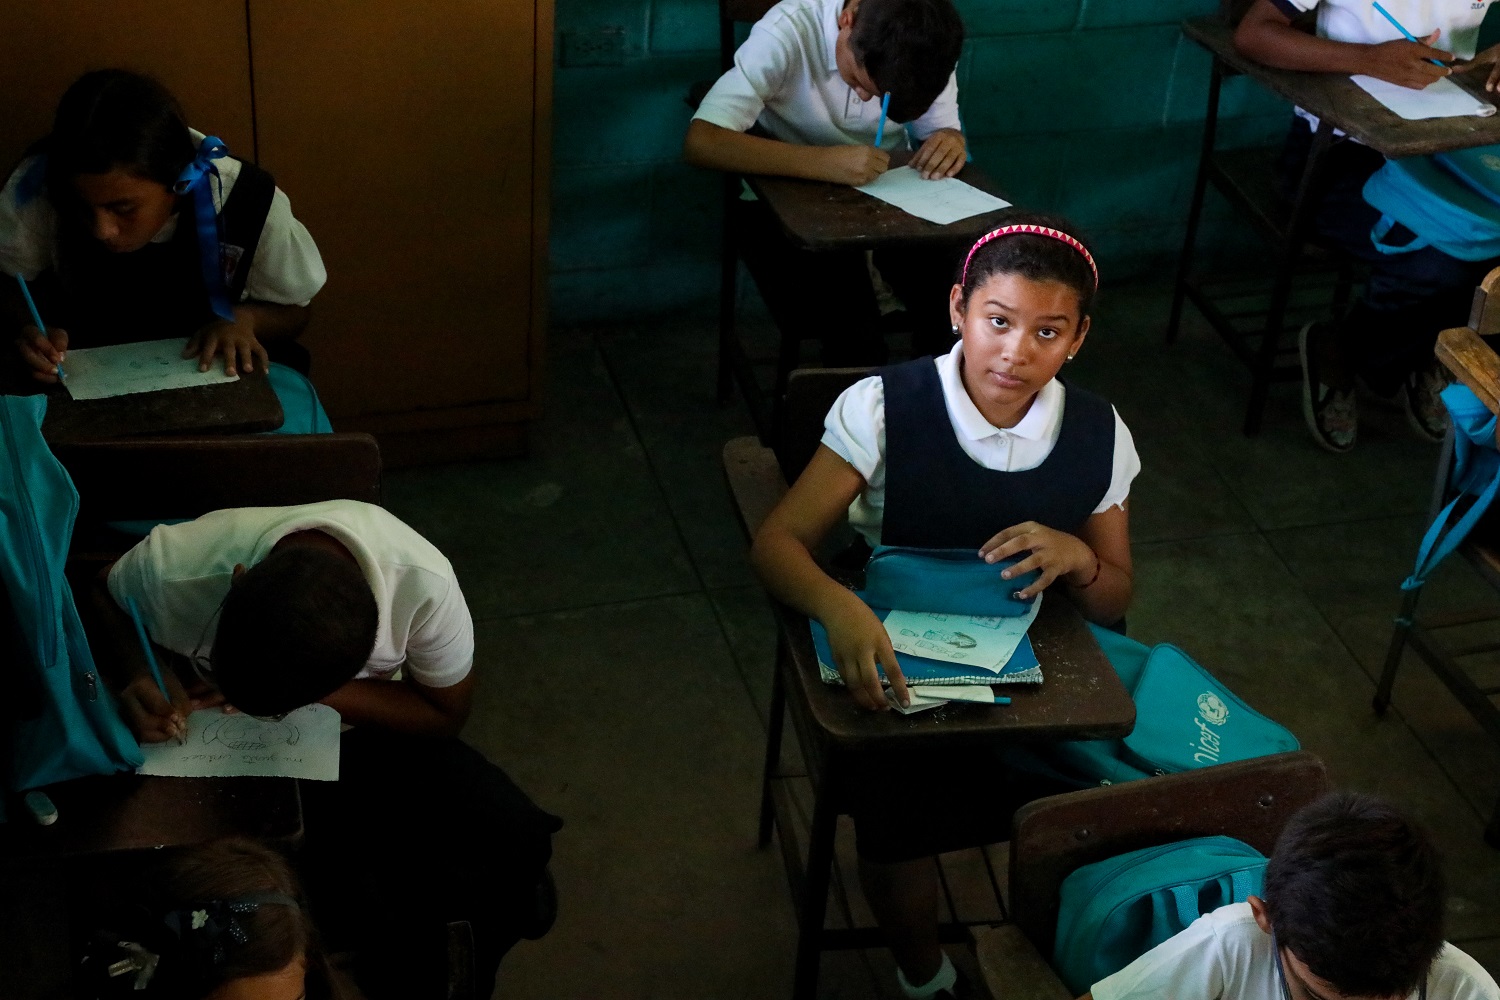 Valeria, 10, goes to a UNICEF-supported school in Maracaibo, Venezuela, where power shortages have forced teachers to shorten the school day.